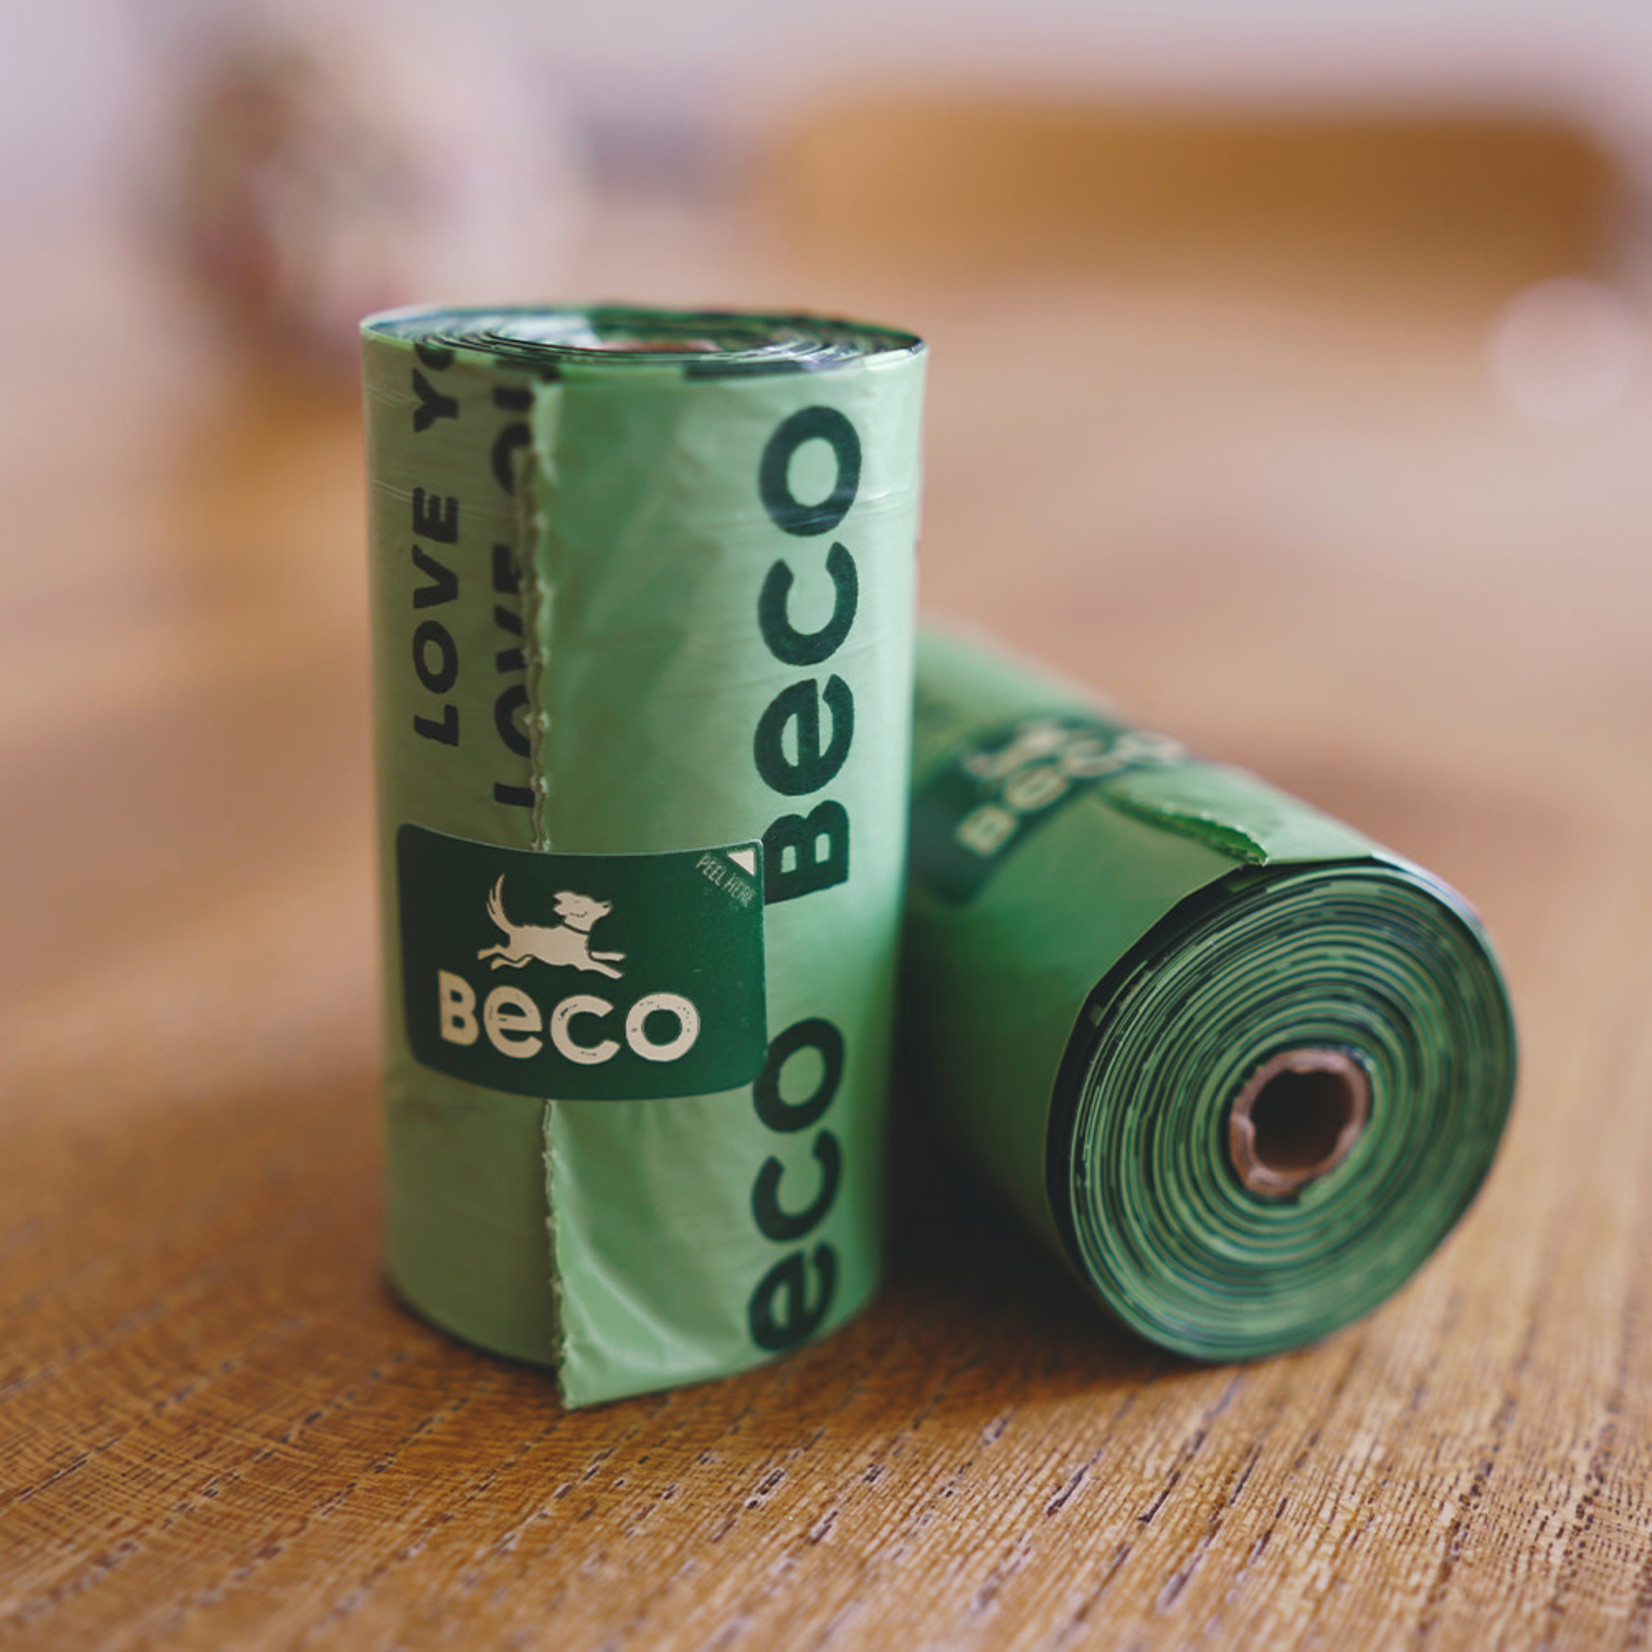 Beco Eco-Friendly Unscented Degradable Poop Bags 60 bags, 4 rolls of 15